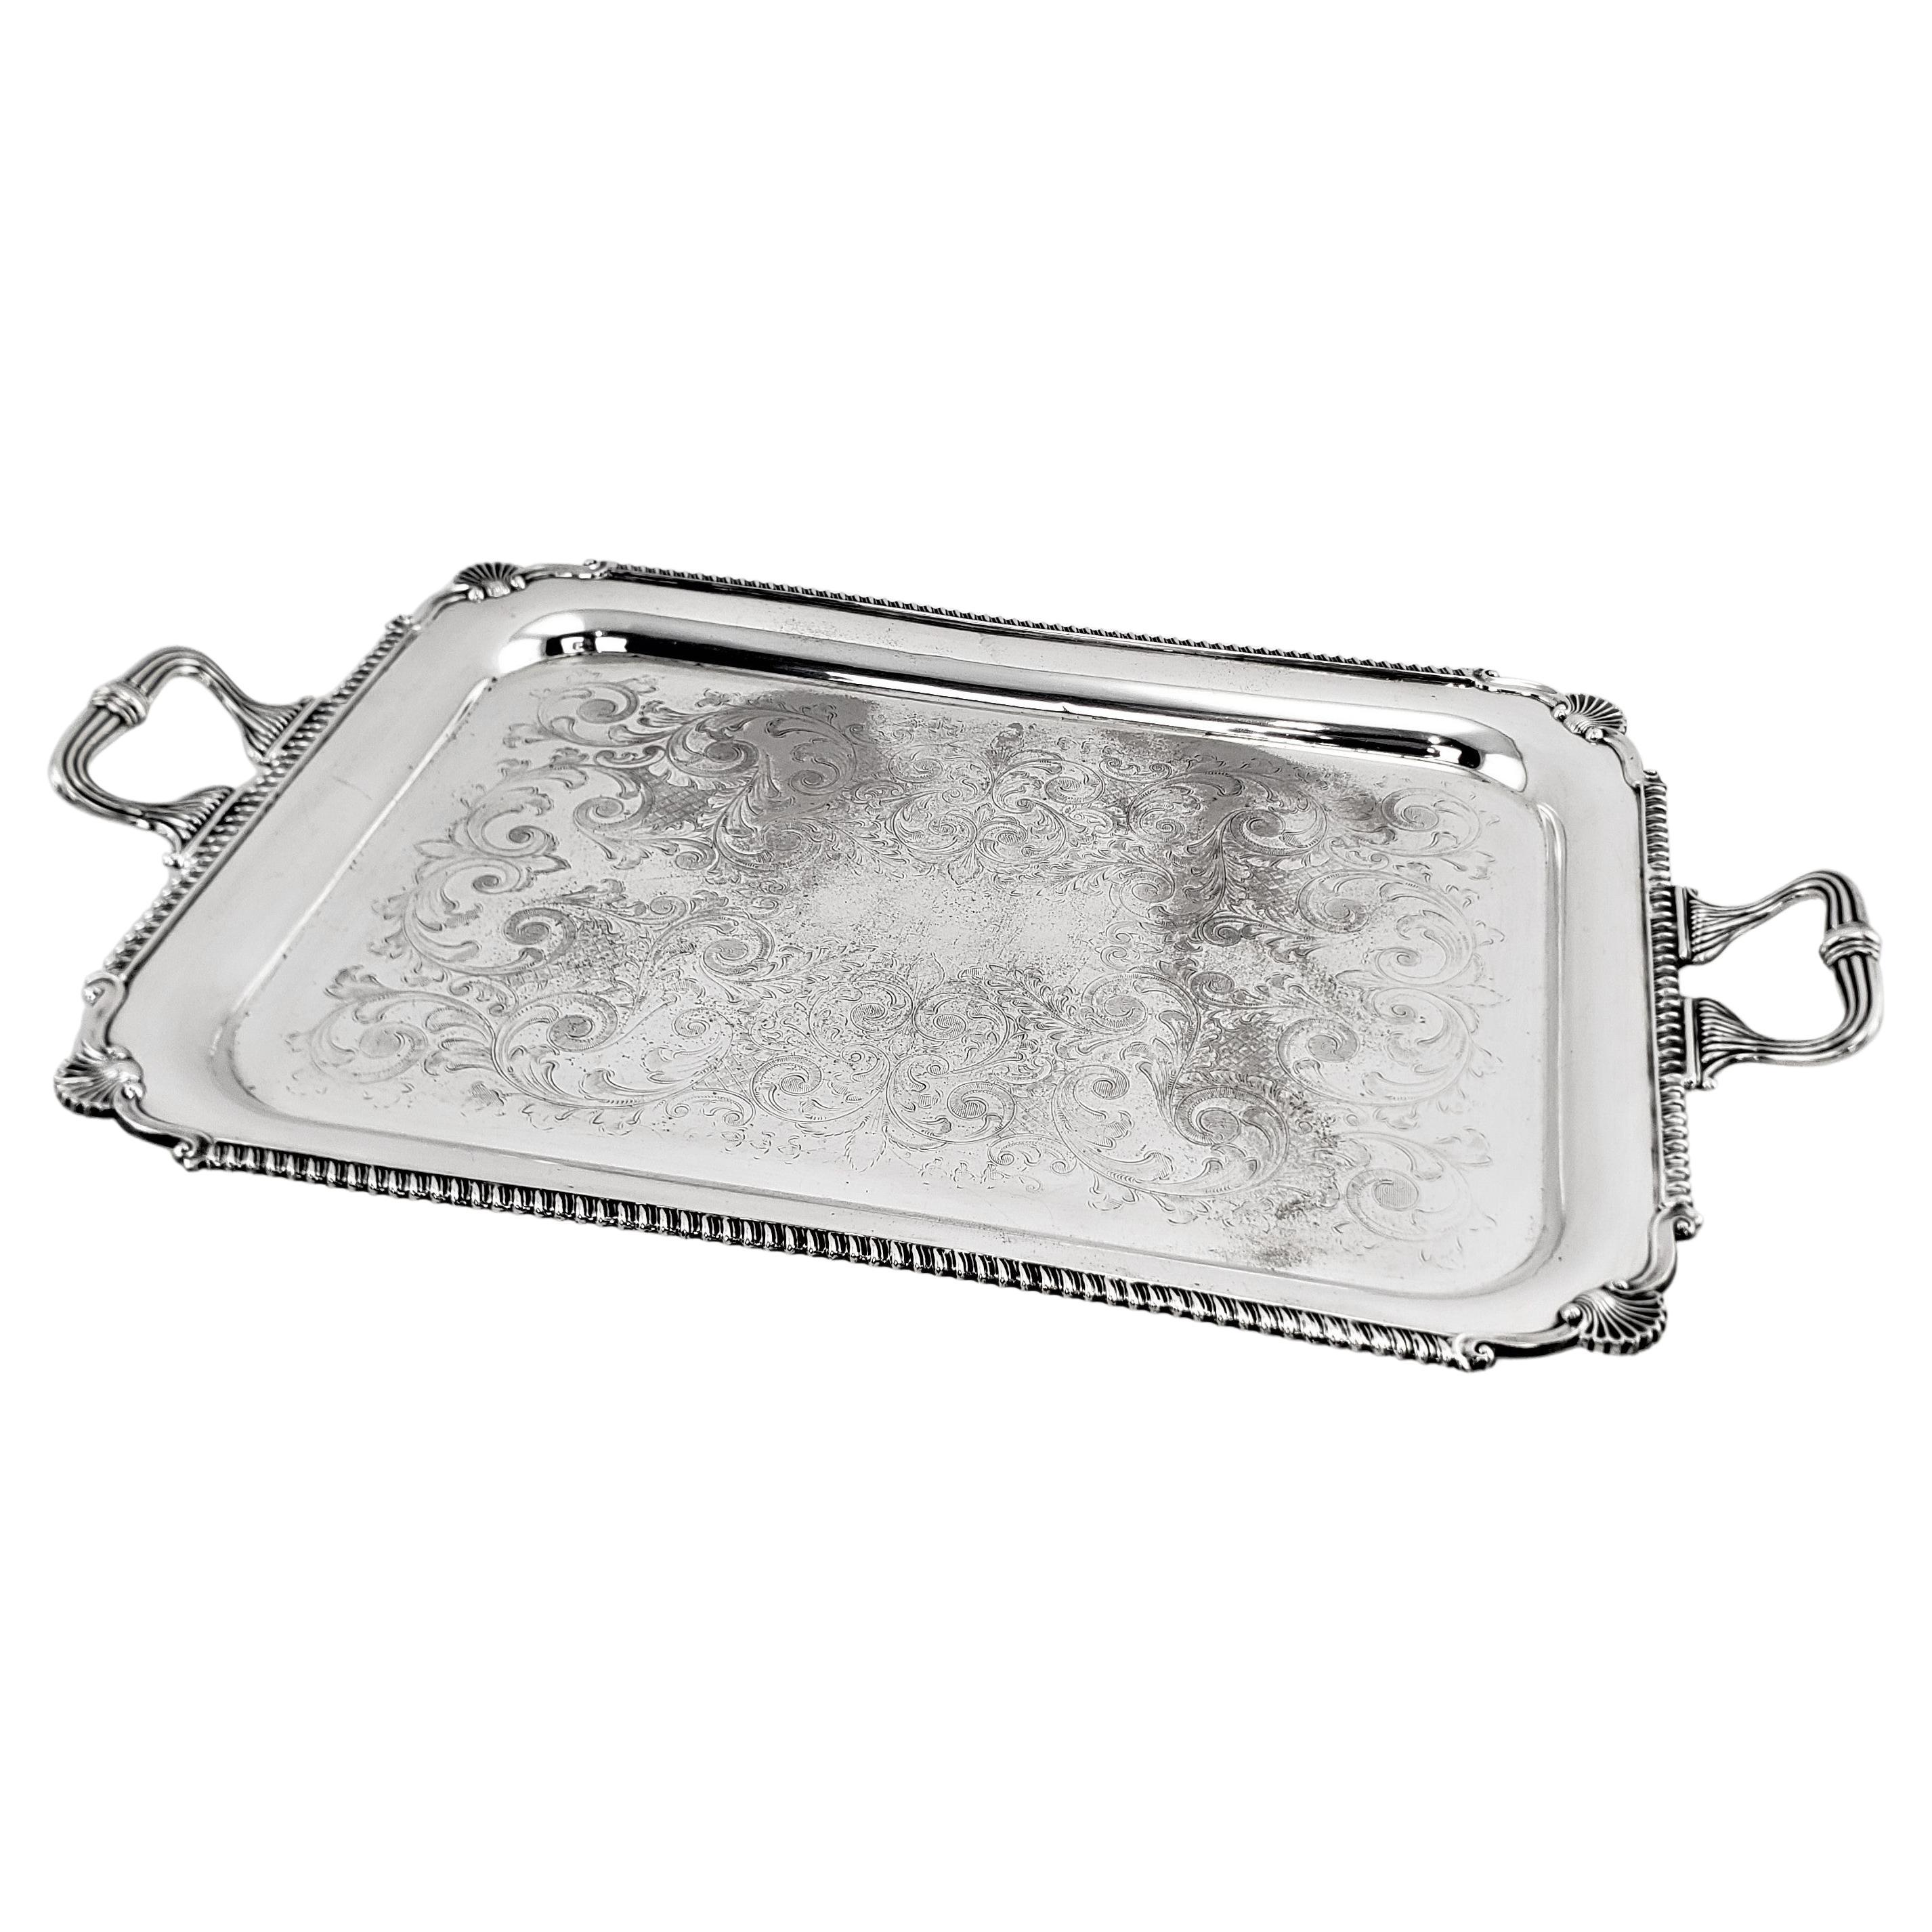 Large Antique English Edwardian Styled Rectangular Silver Plated Serving Tray